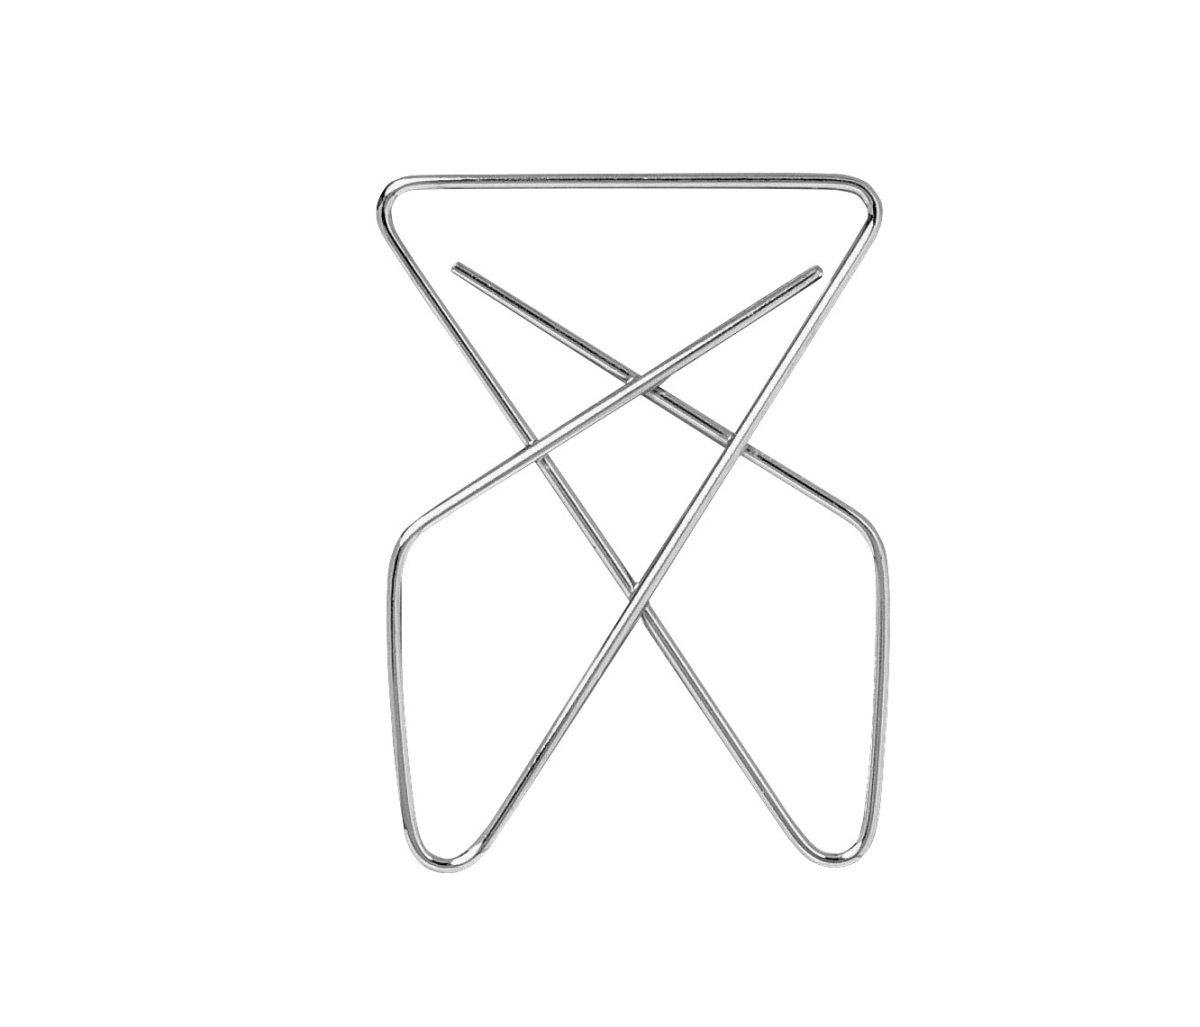 000066 Butterfly Large Number 1 Paper Clip, 2.50 In. - Steel Wire - Pack Of 12